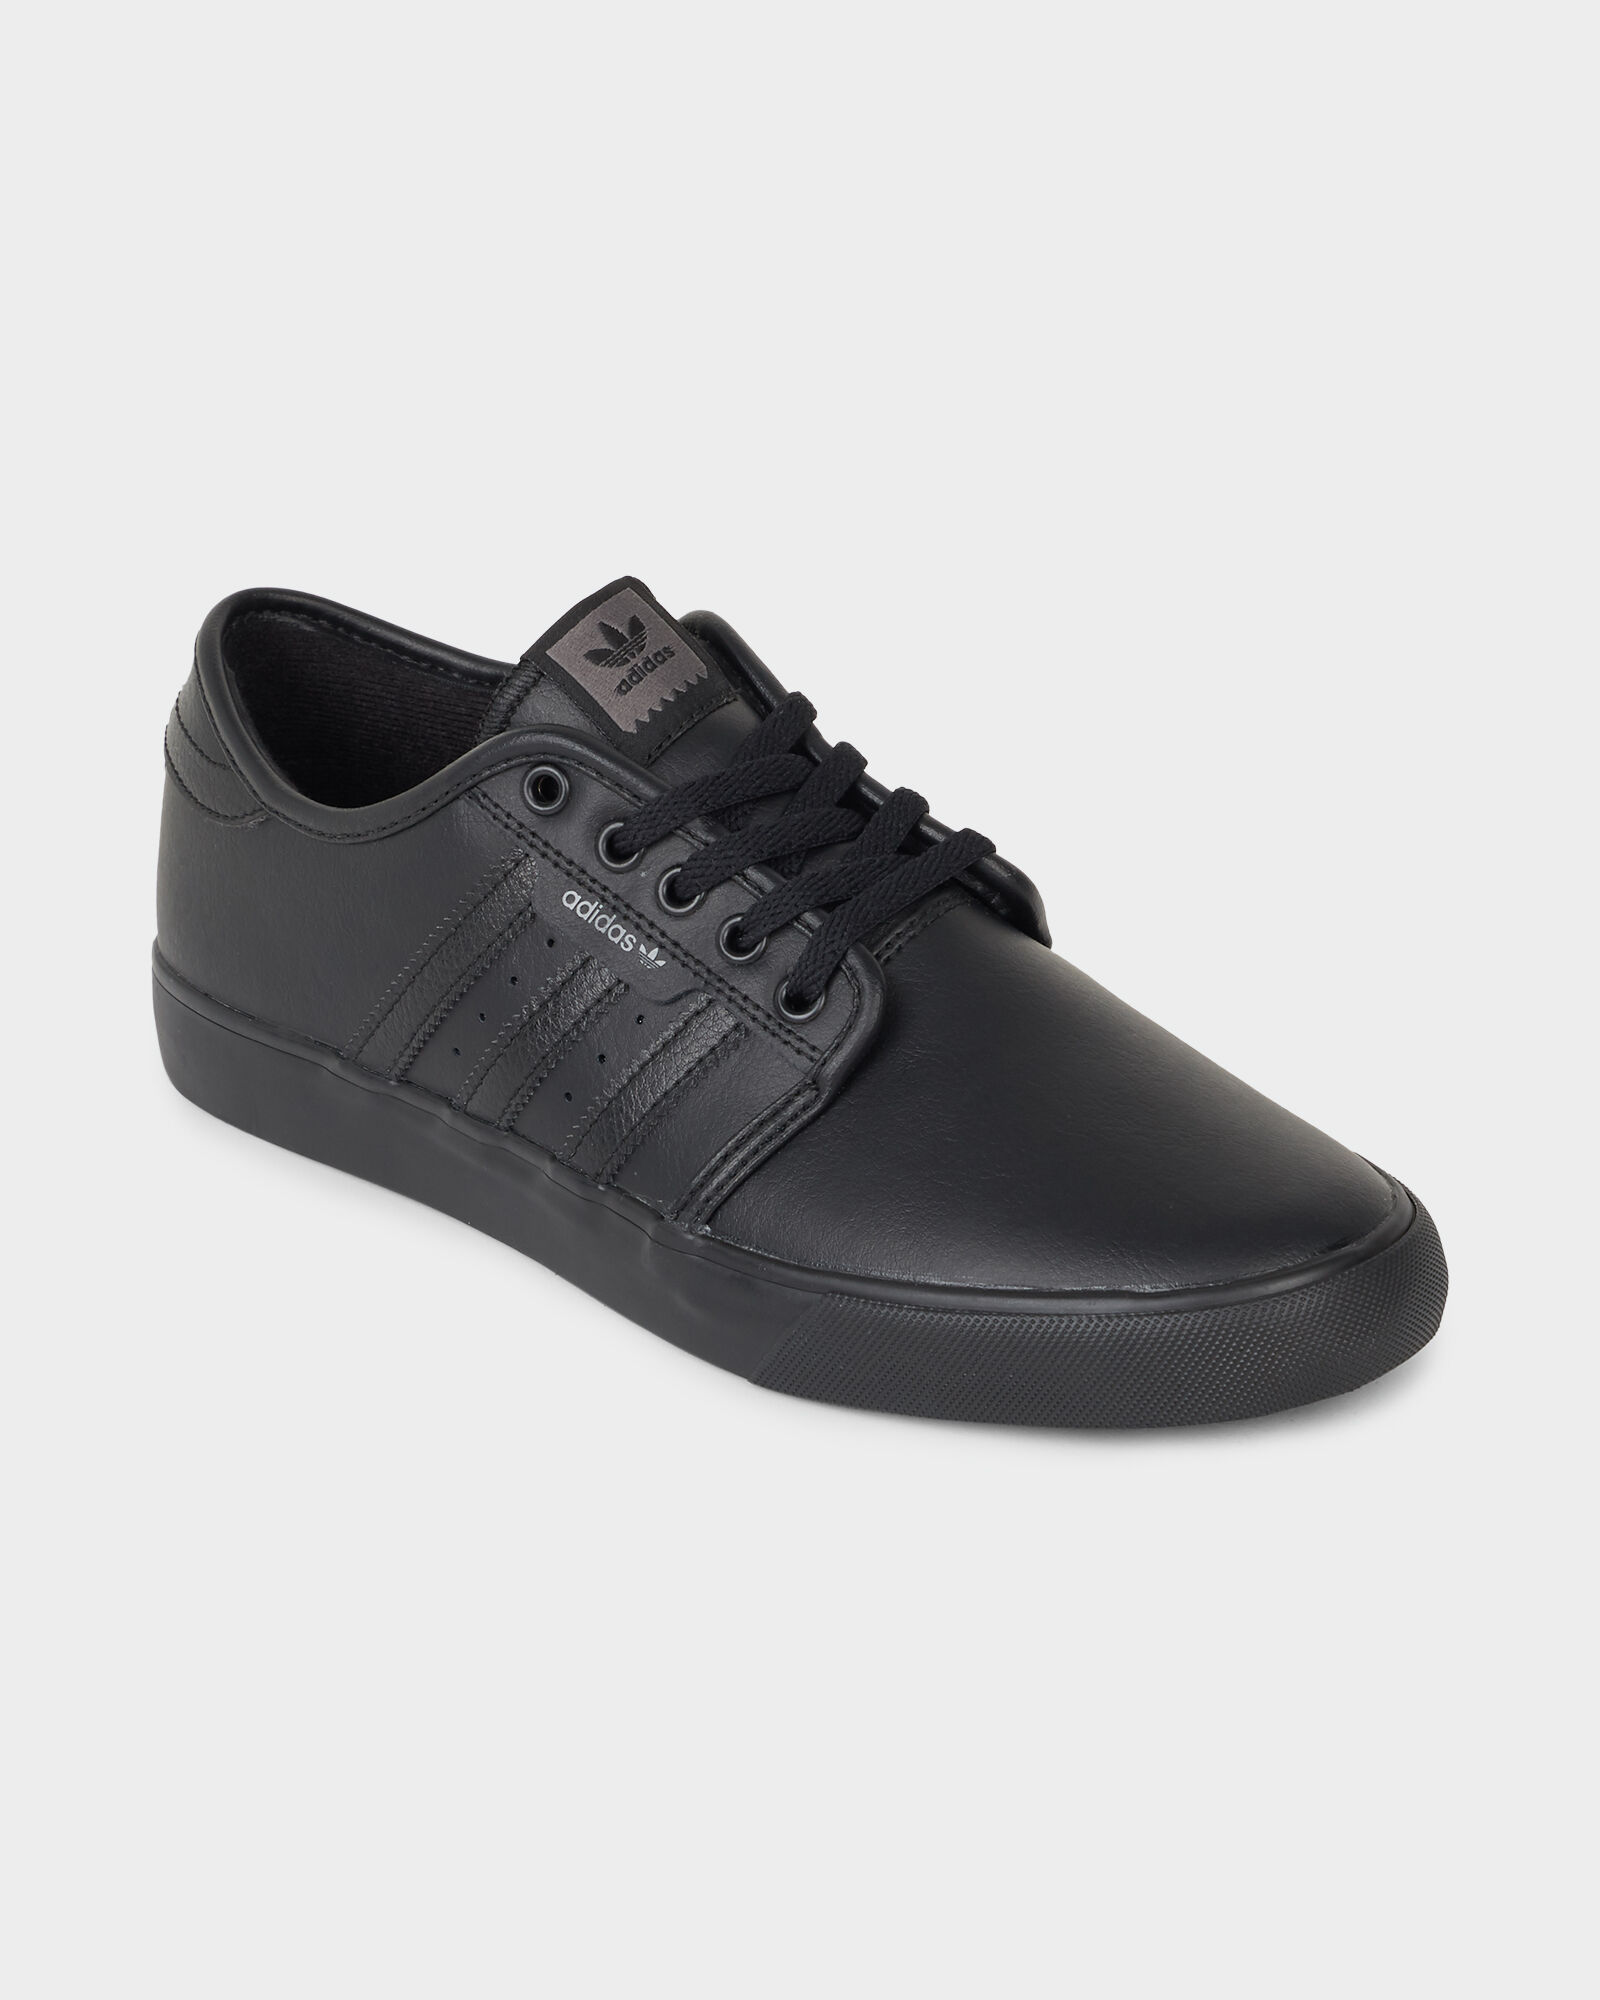 adidas womens seeley shoes